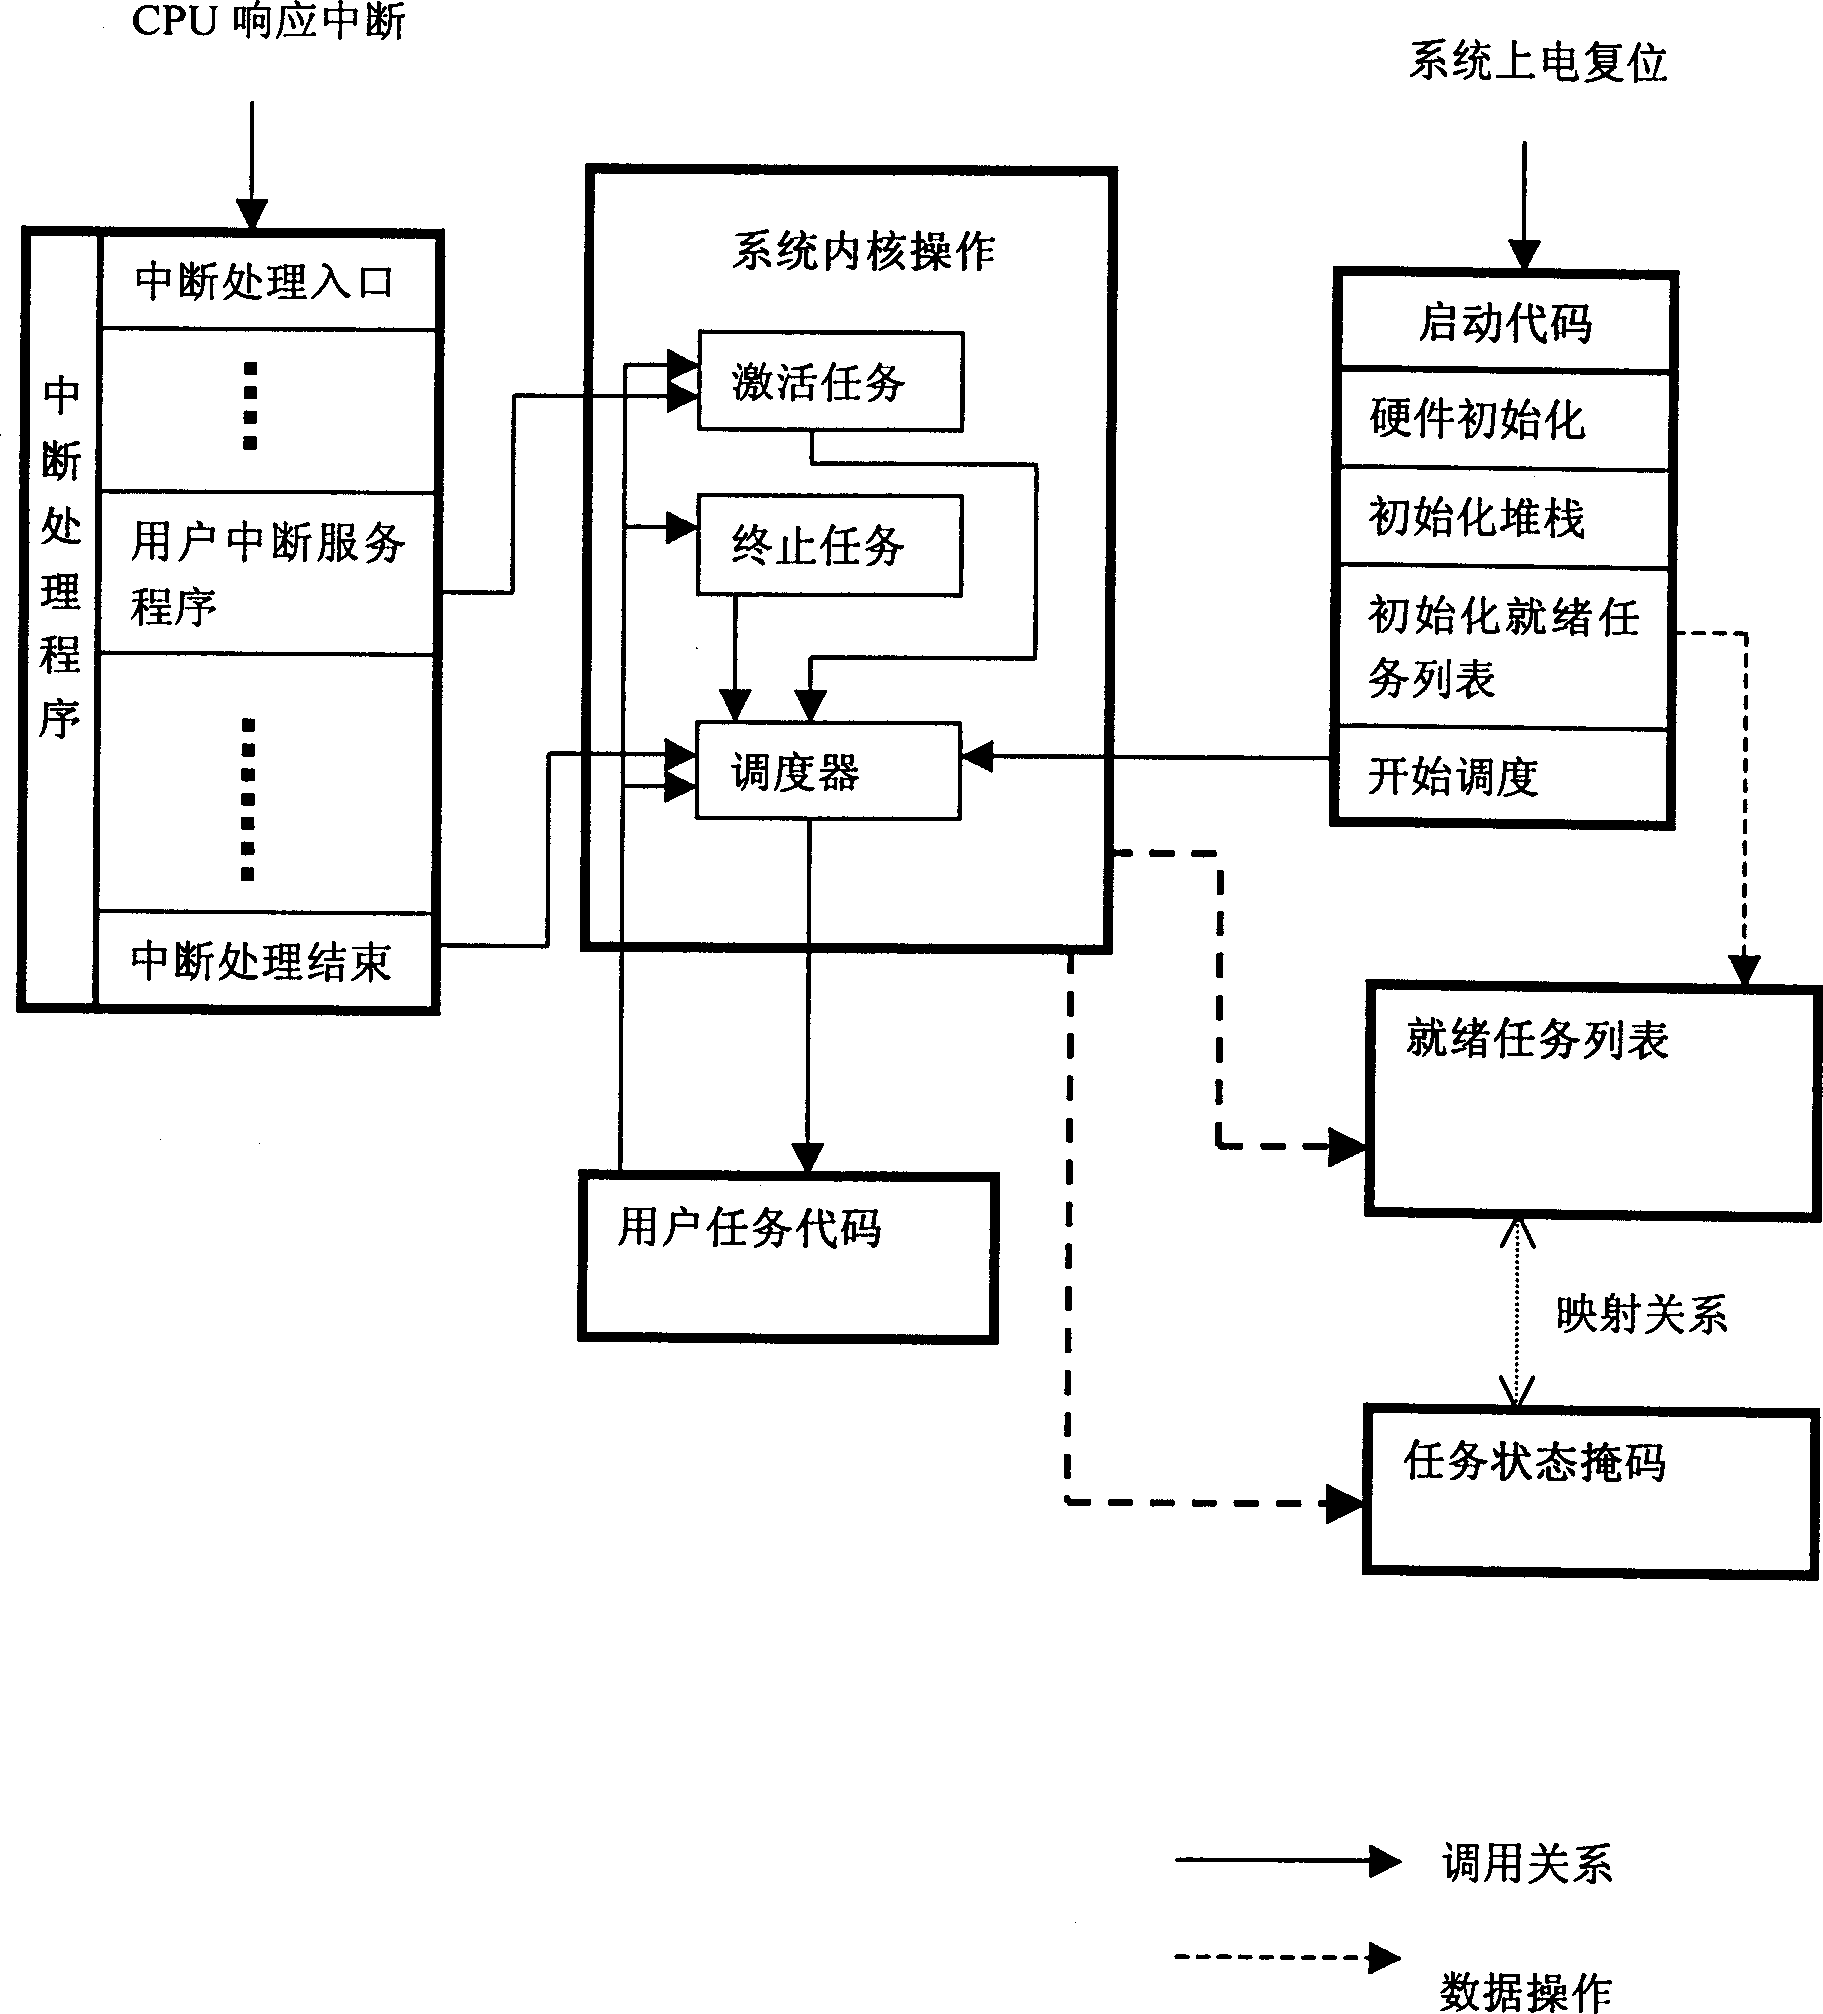 Binary chop type task dispatching method for embedding real-time operating system